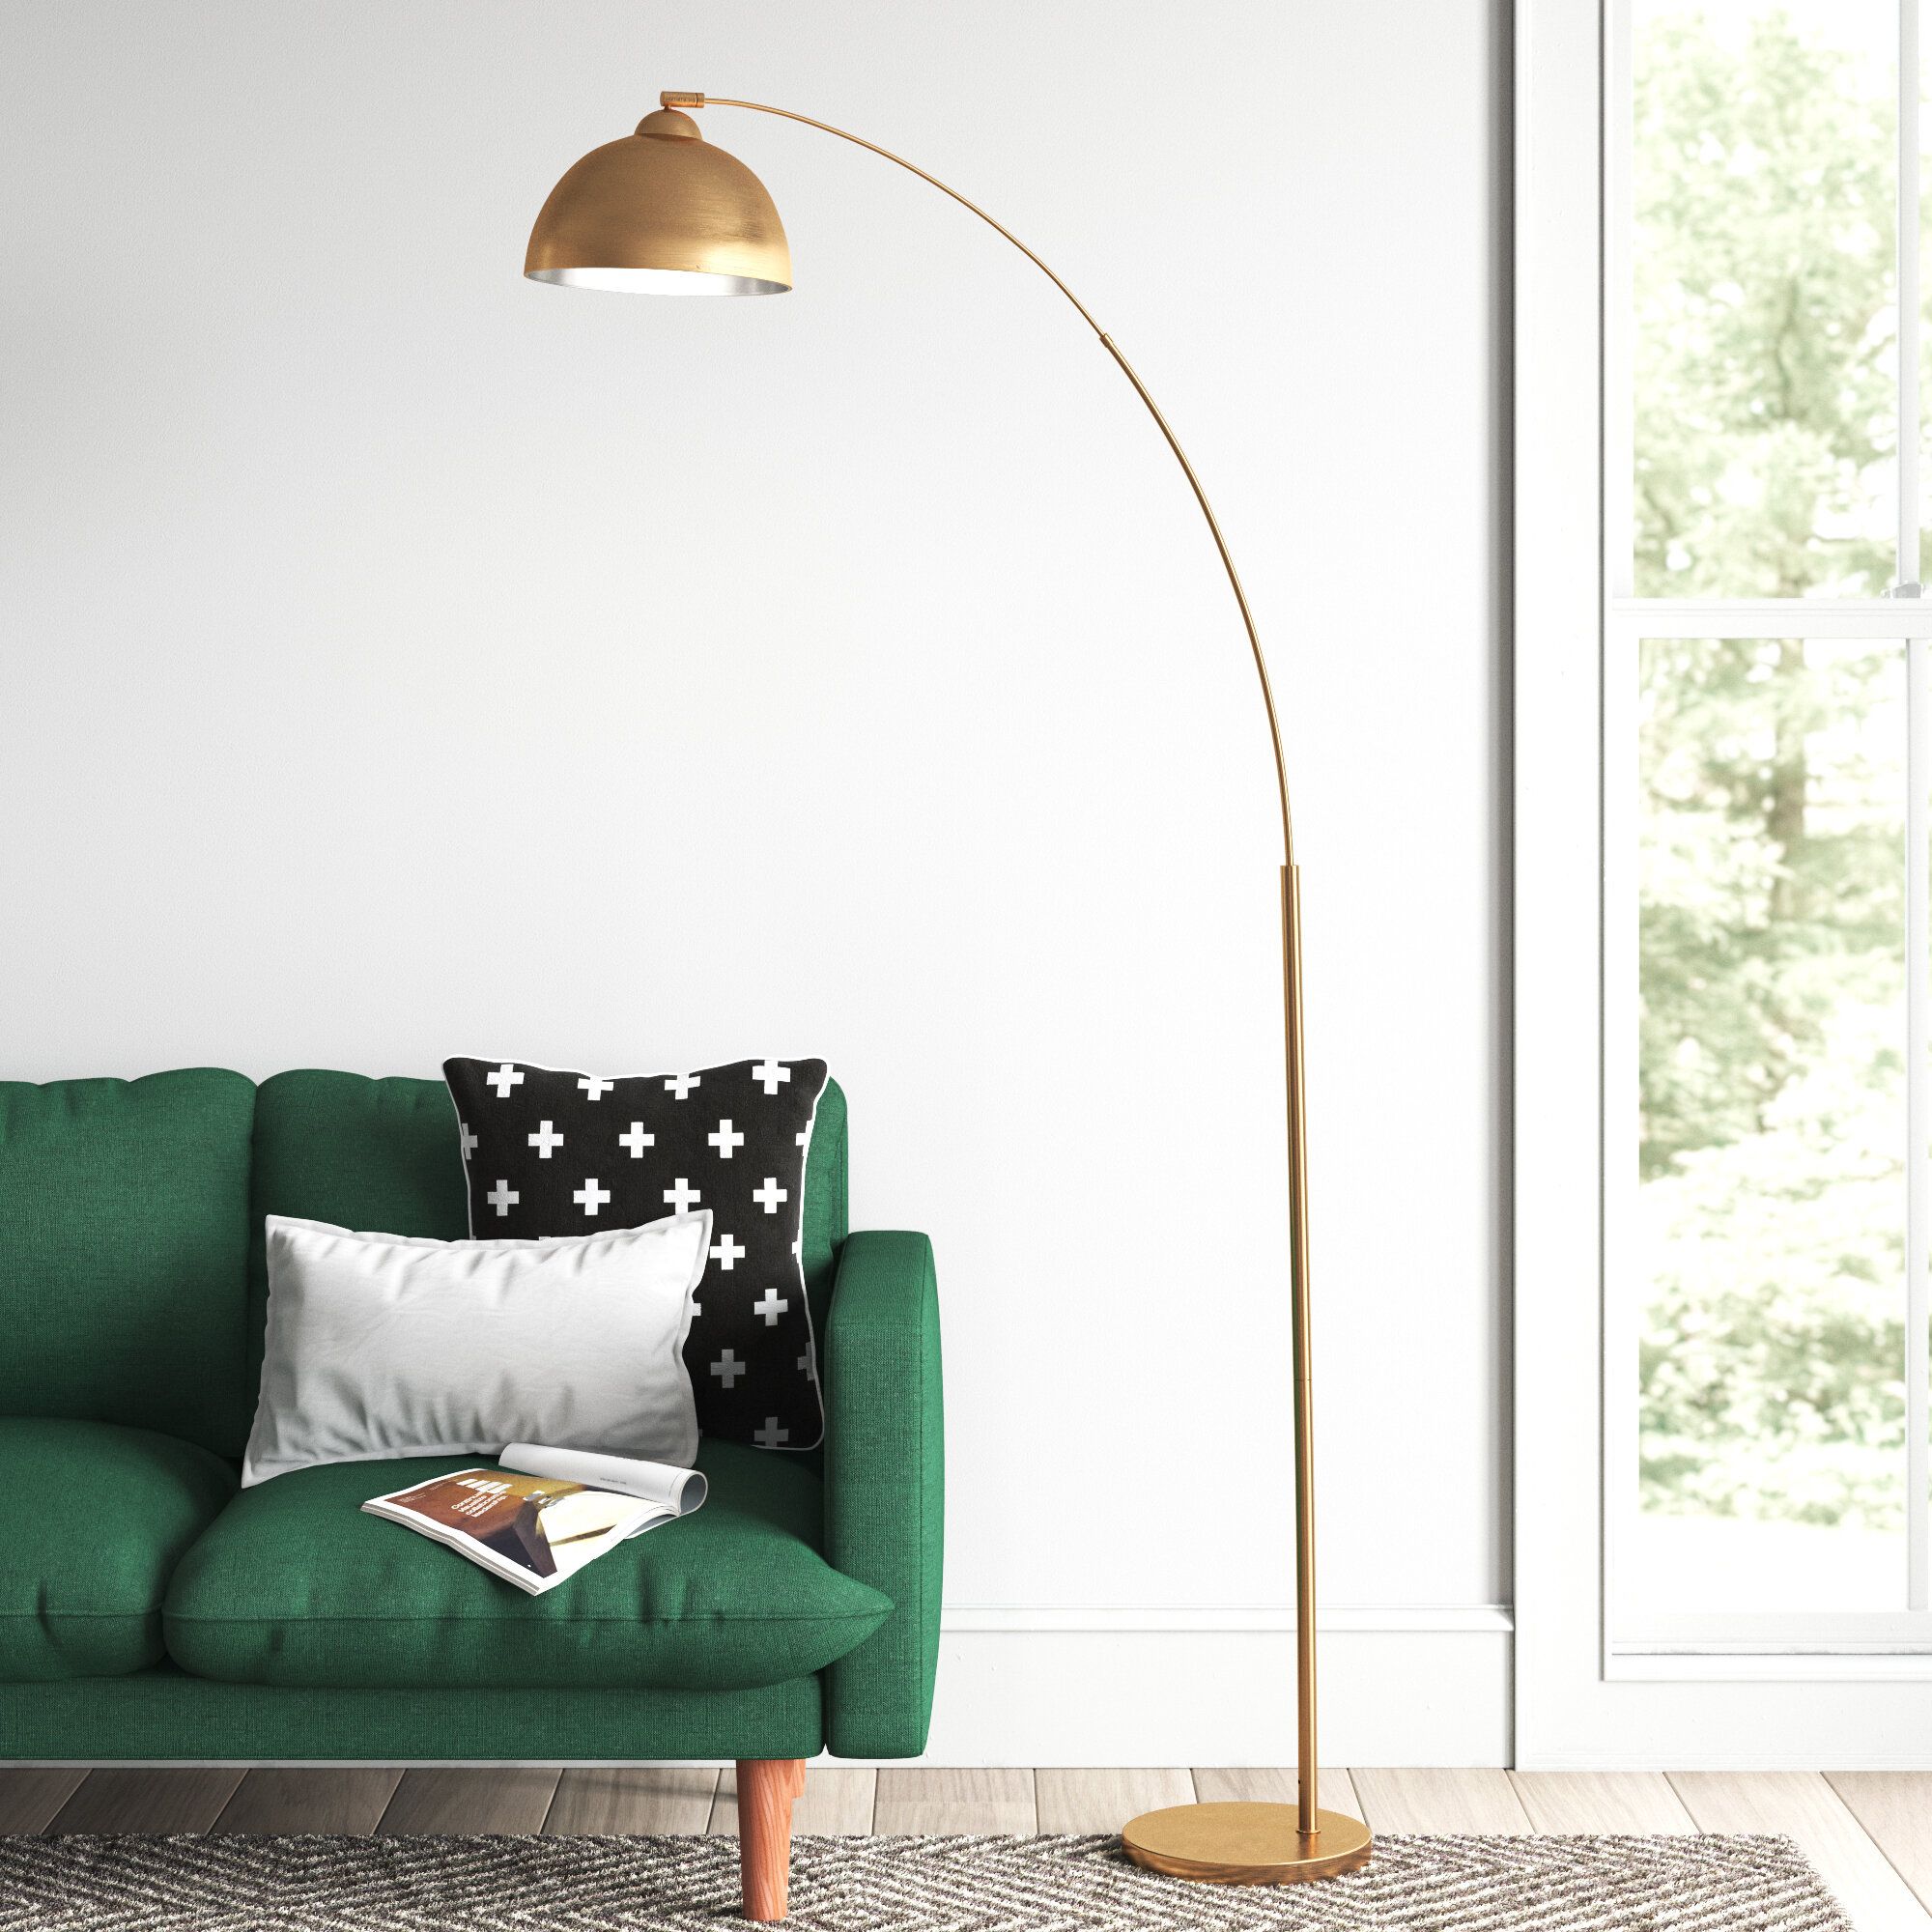 Wade Logan® Arenstein Angelray 79" Arched Floor Lamp & Reviews | Wayfair With Arc Floor Lamps (View 12 of 15)